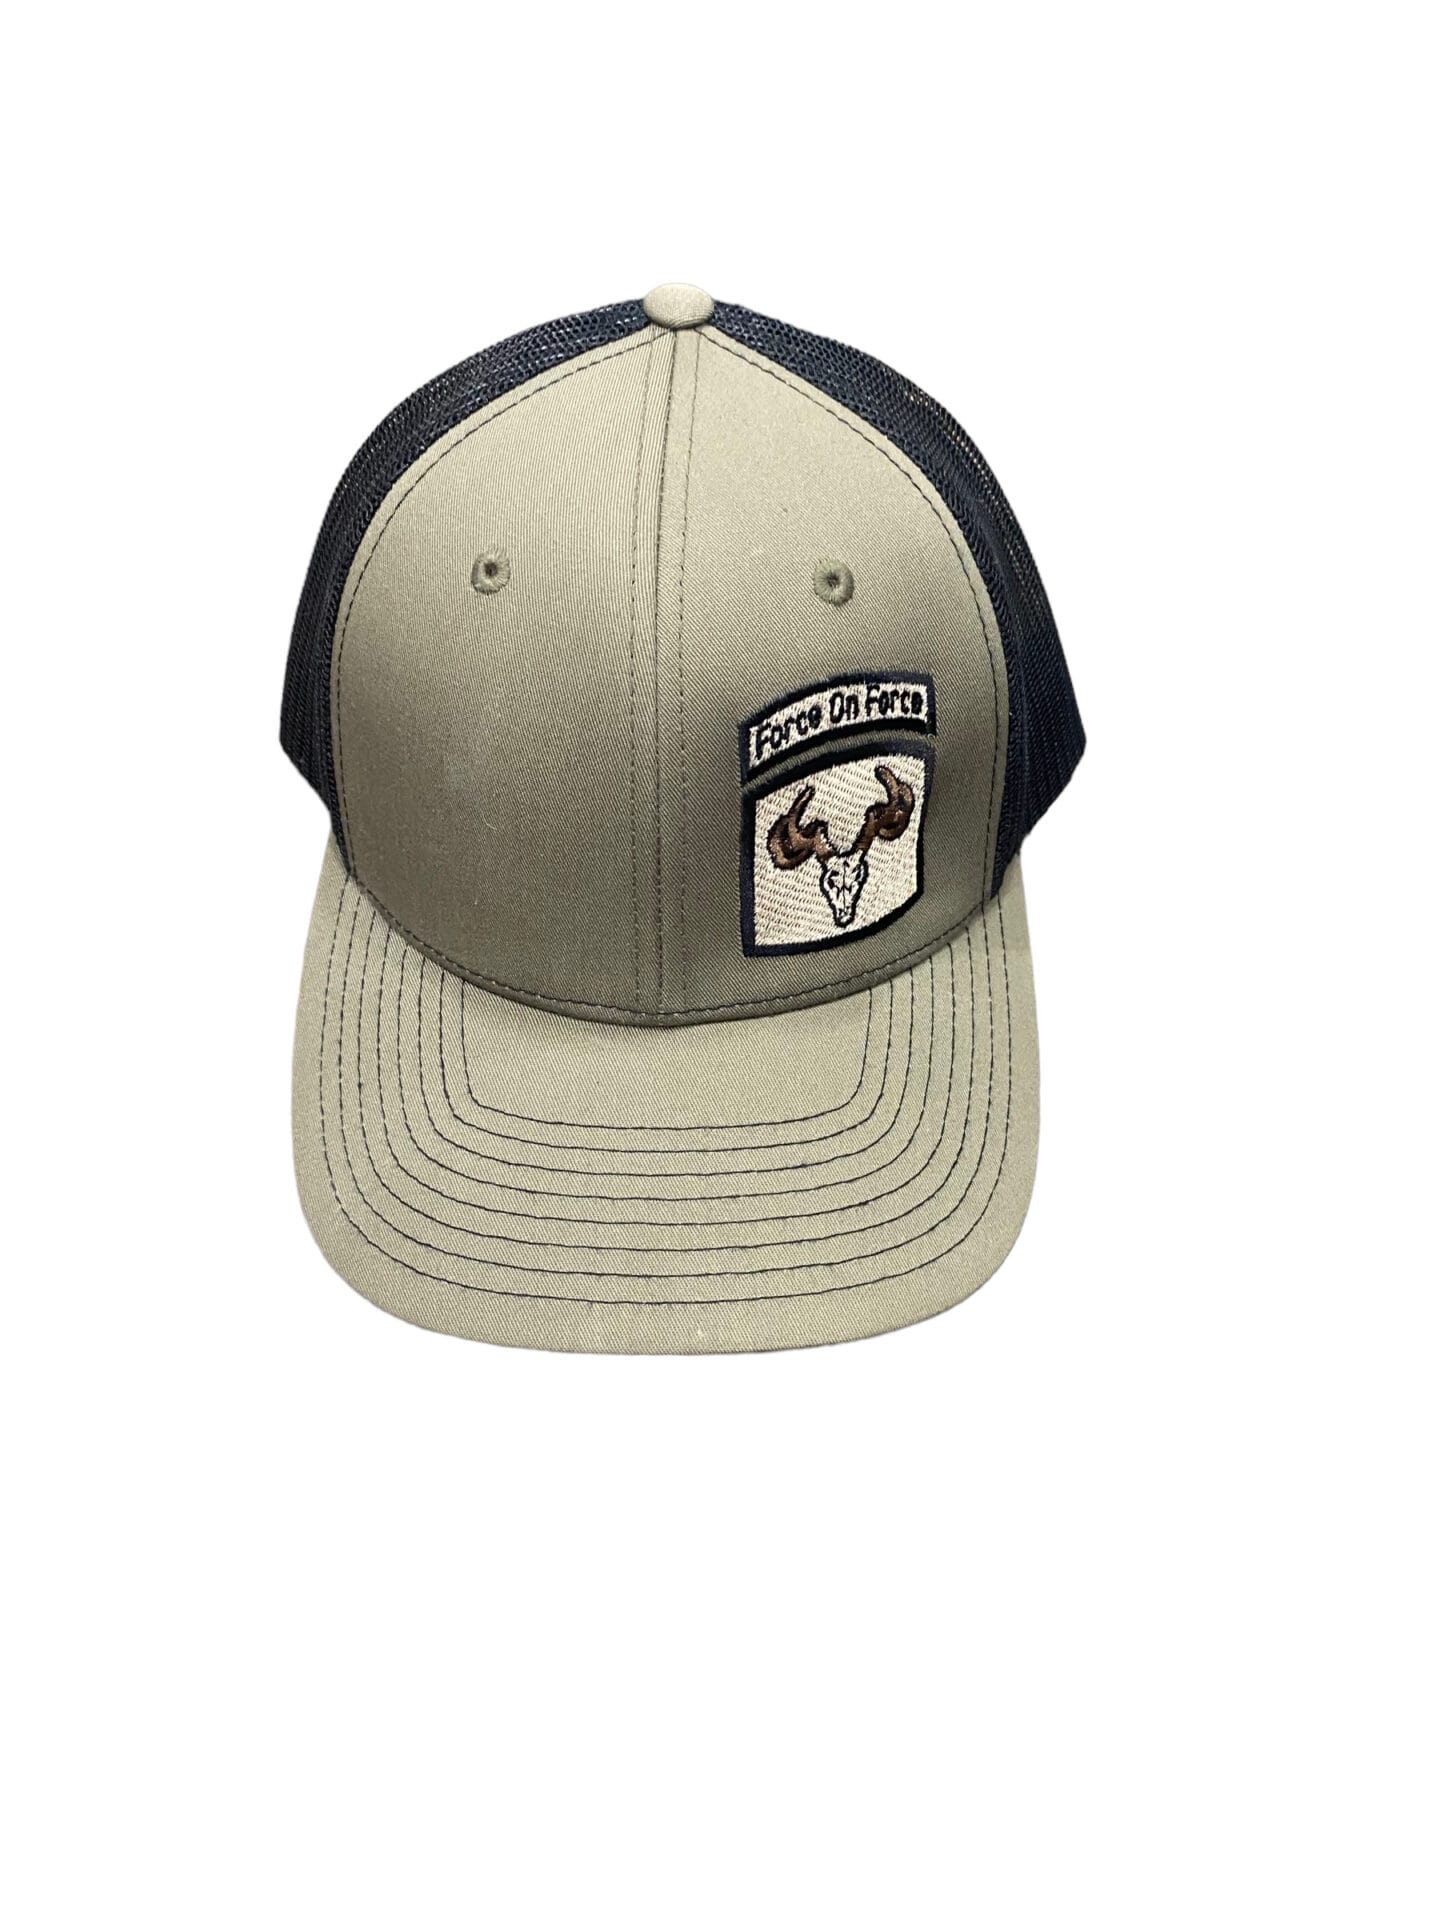 Richardson Force on Force Hat - Buck Hunters | Force on Force TV